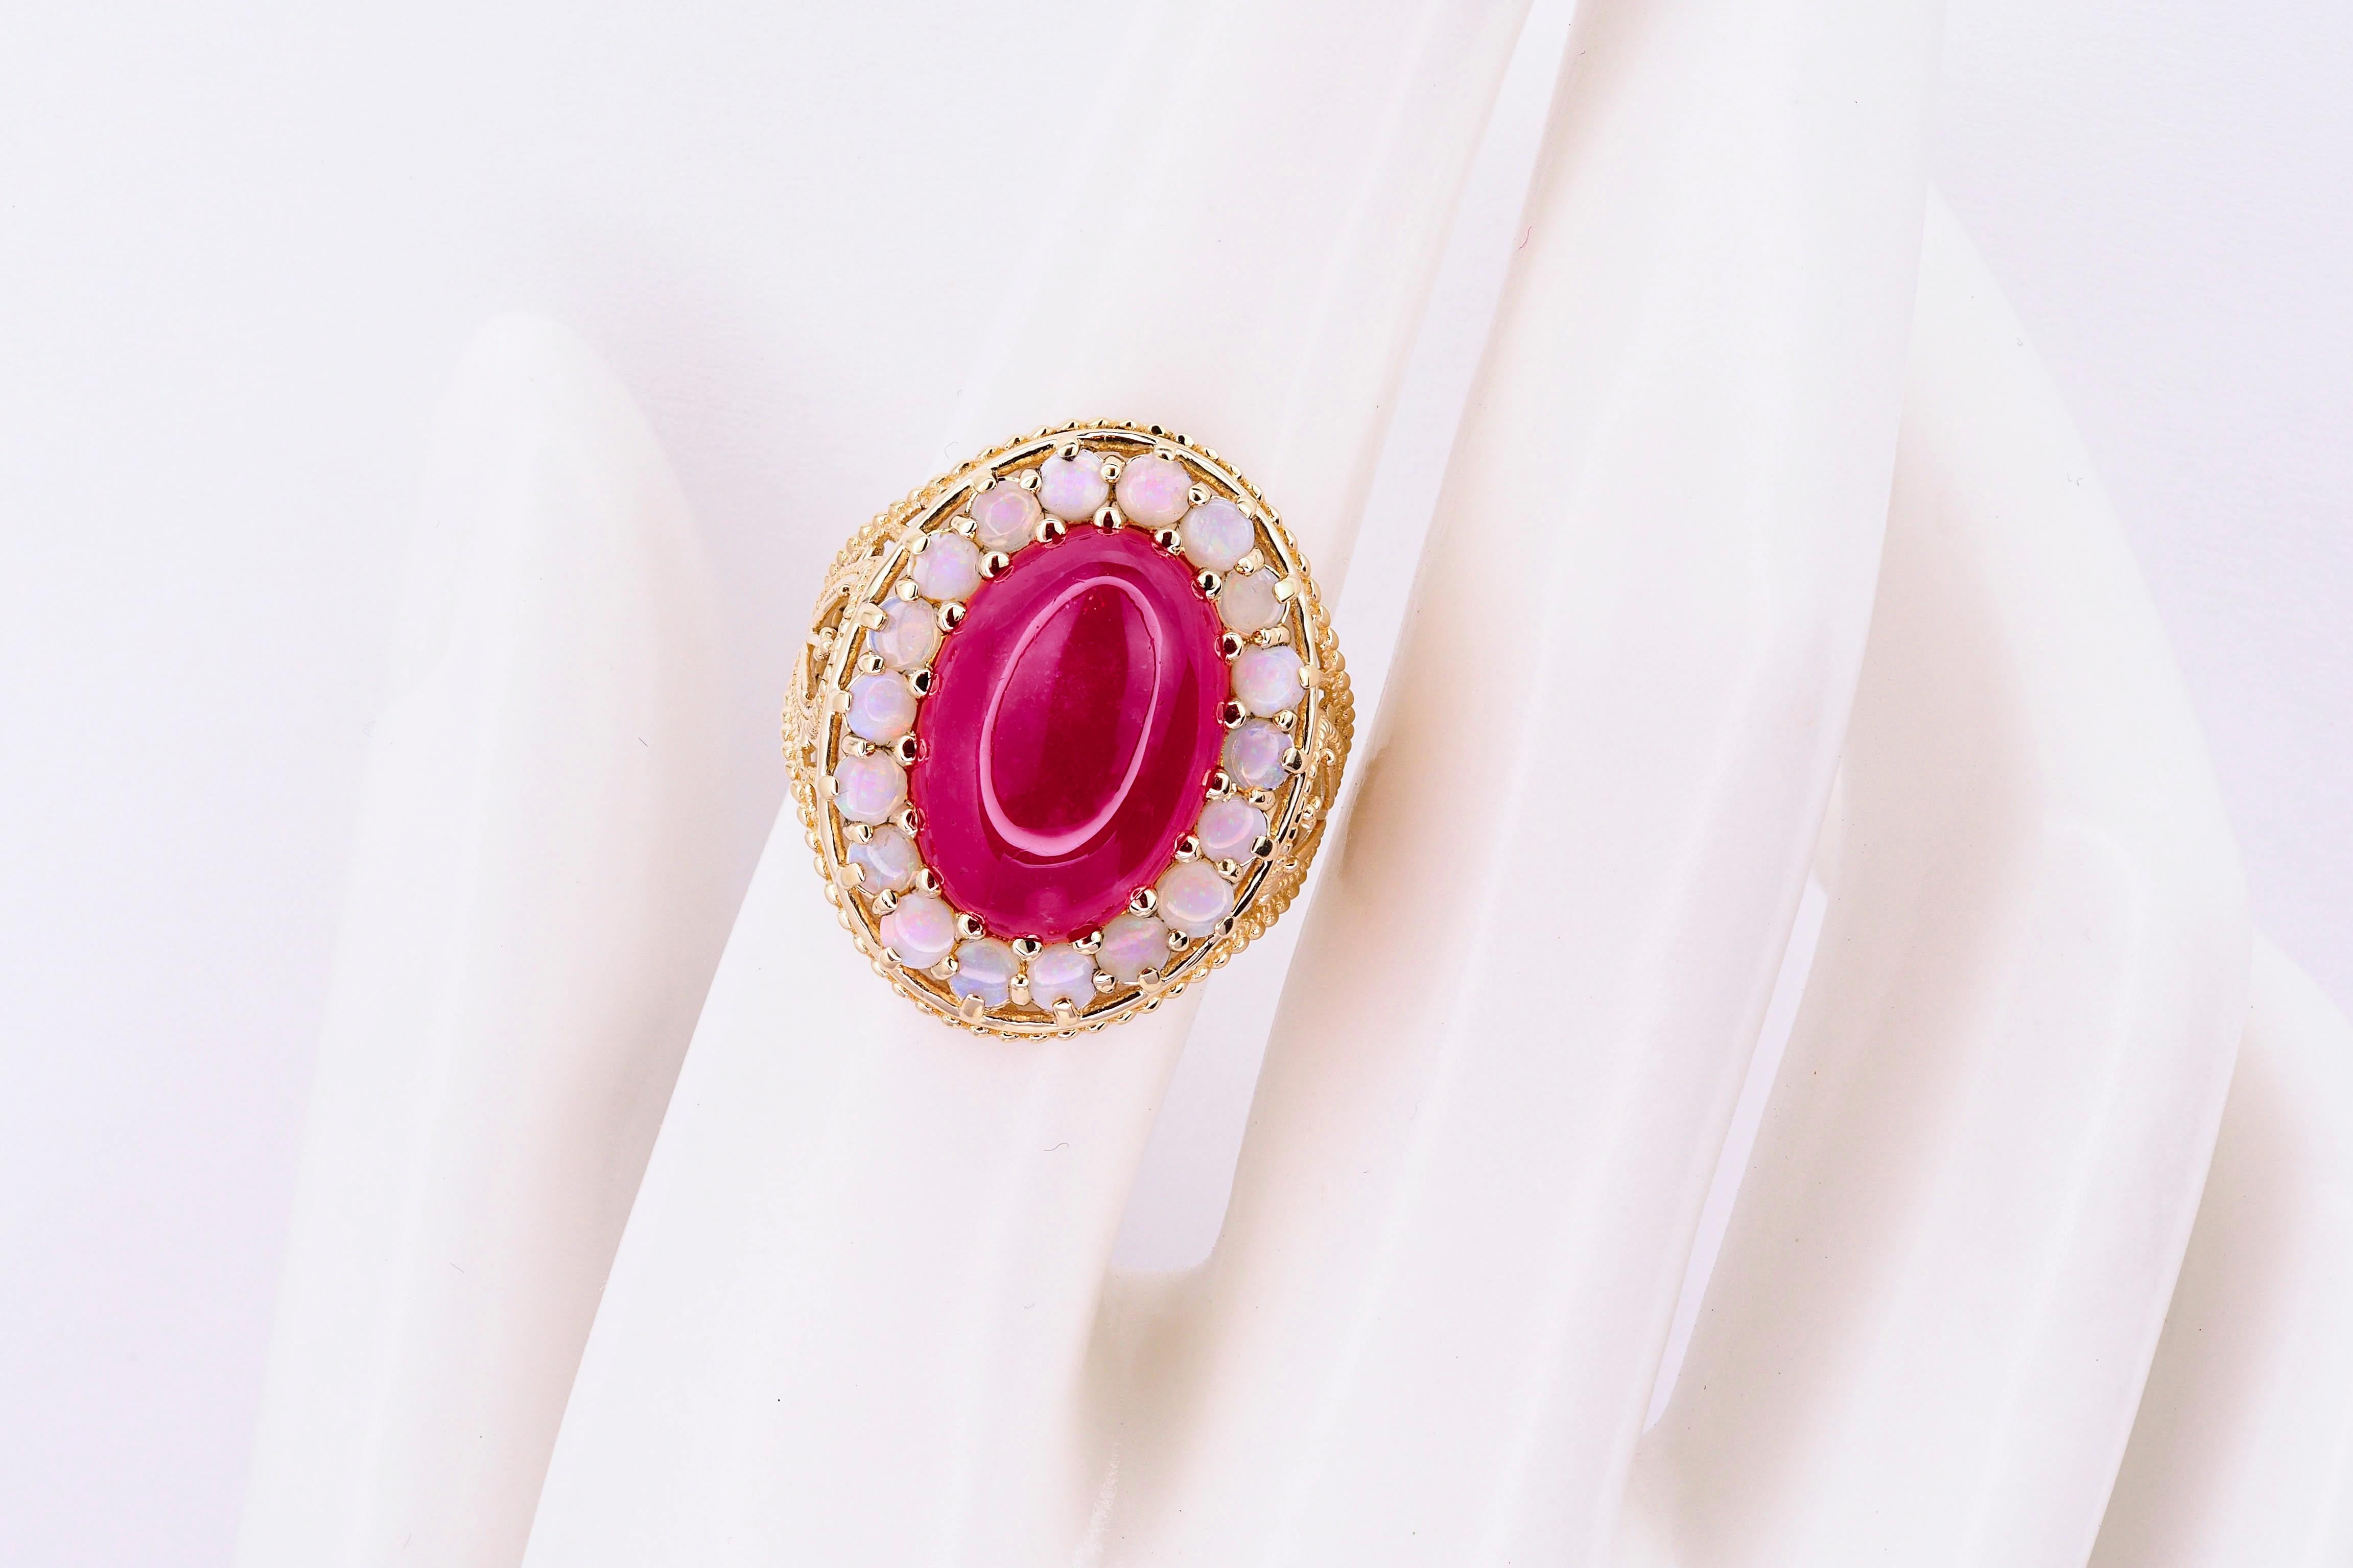 For Sale:  14k Massive Gold Ring with Cabochon Ruby and Opals, Vintage Inspired Ring 7